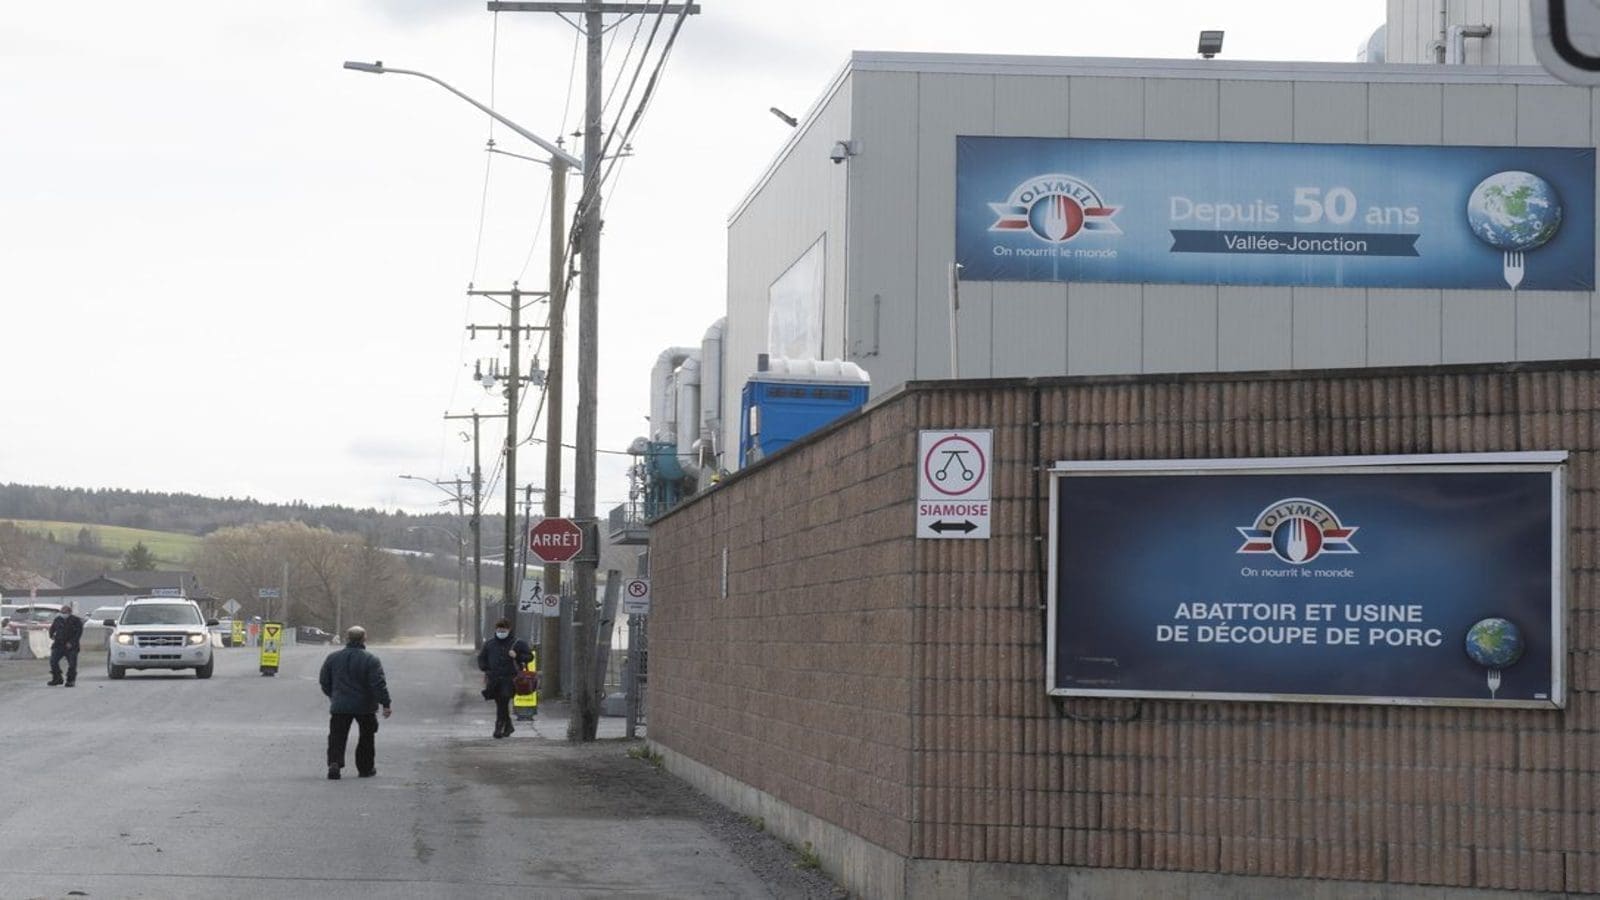 Olymel to close and sell St-Hyacinthe pork processing plant due to unfavorable economic situation